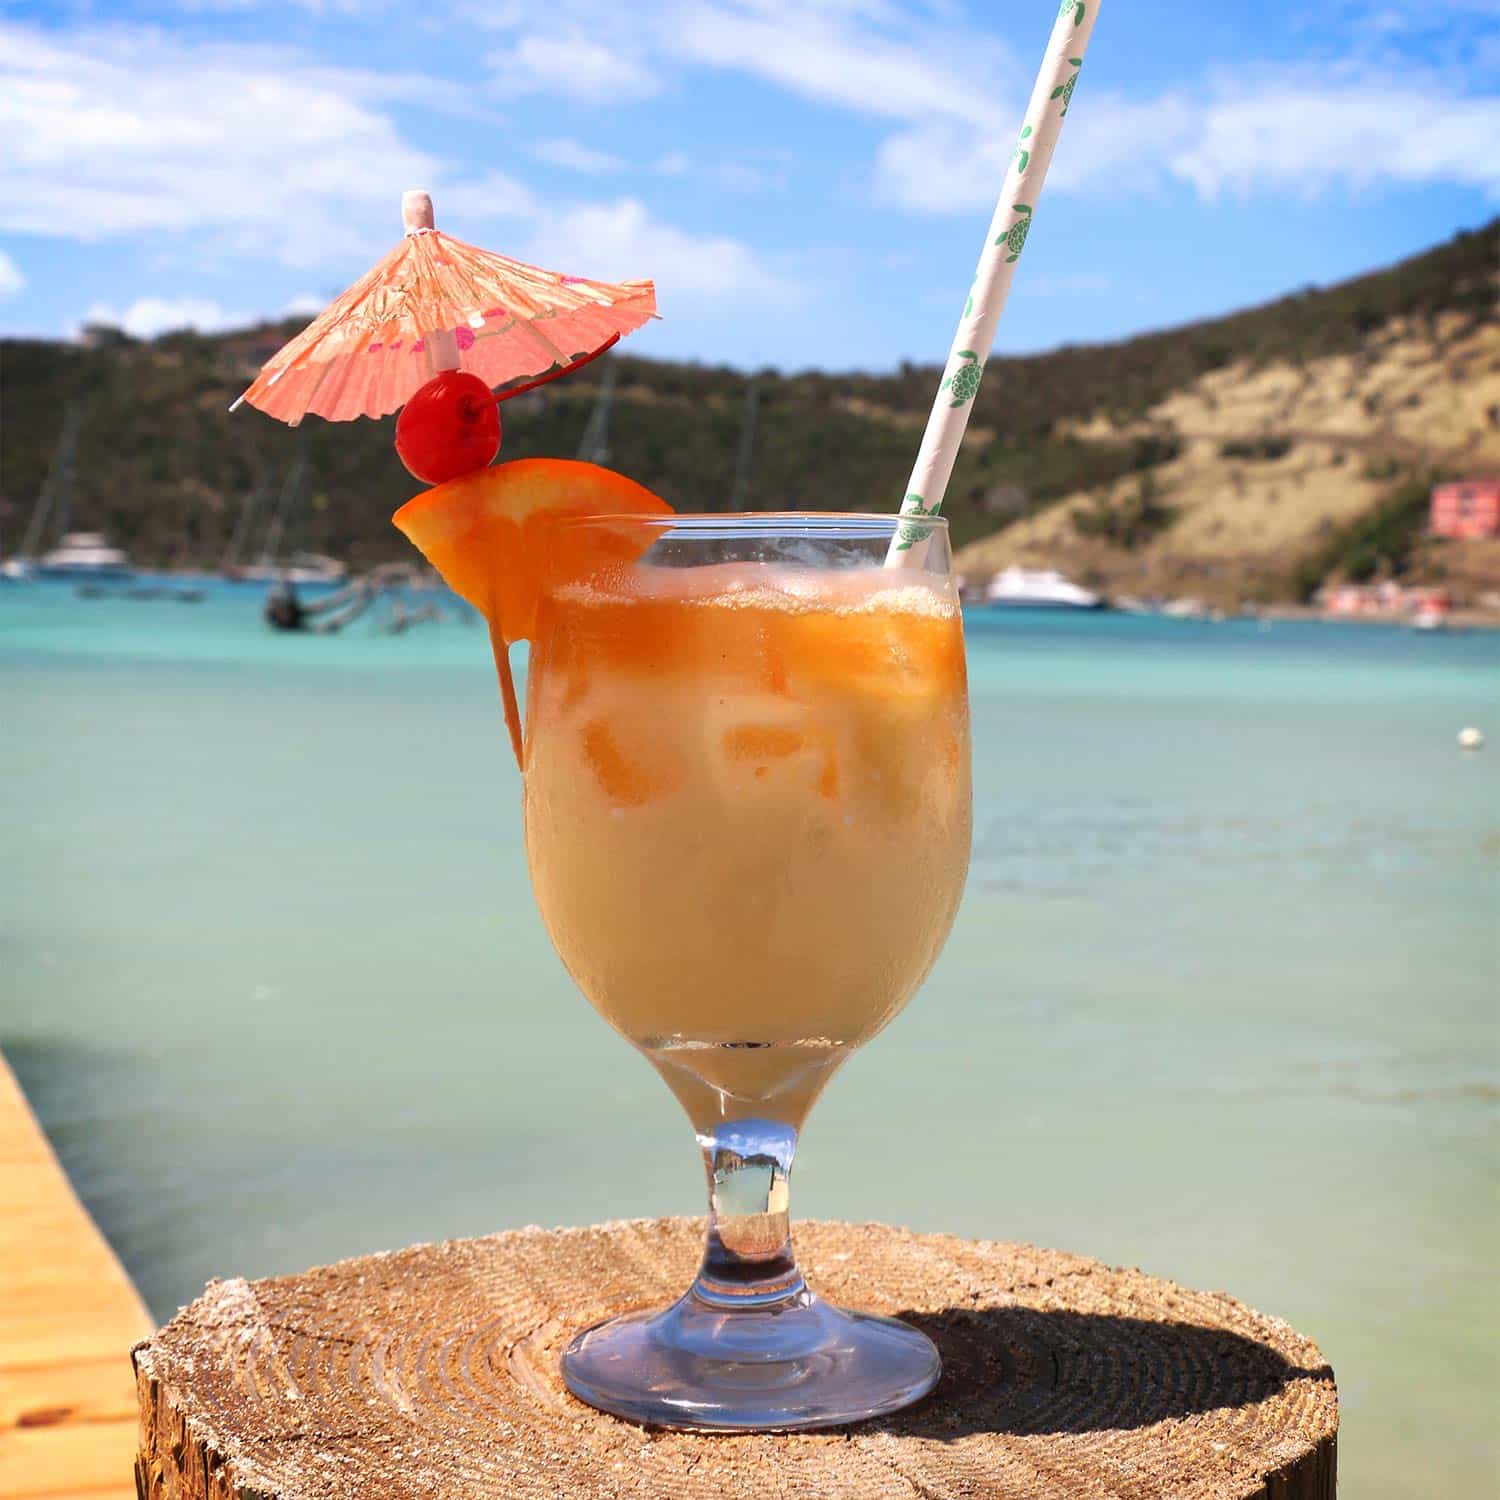 A tropical cocktail on a table by the beach.